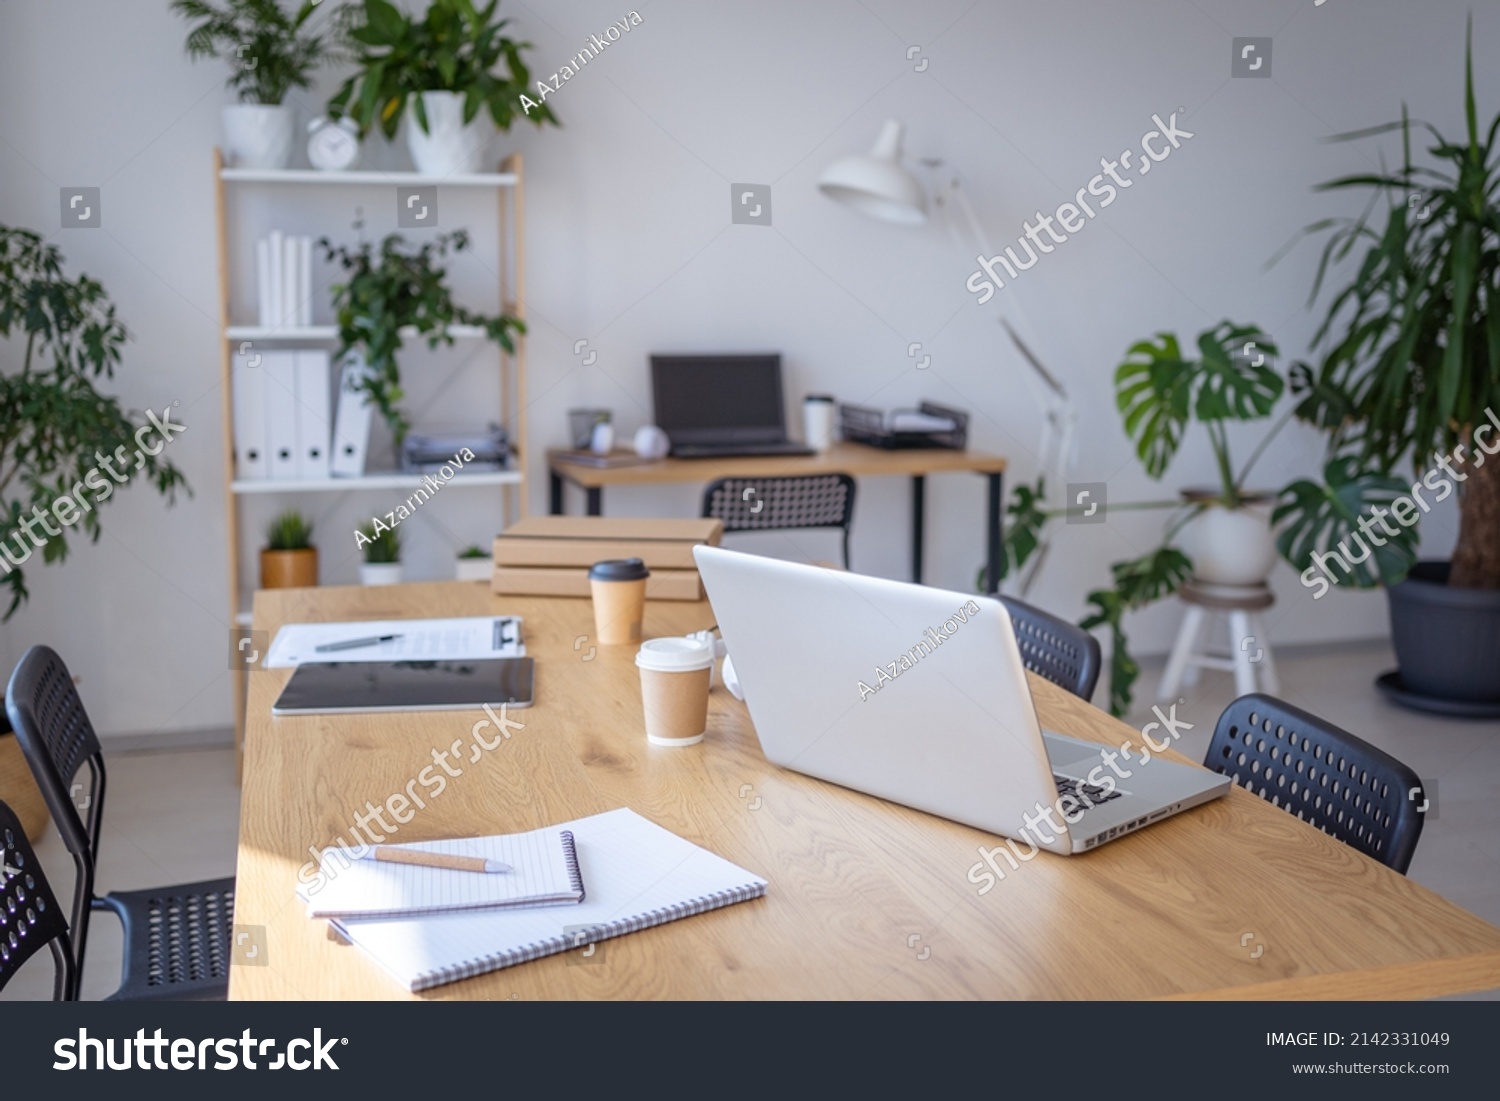 Laptop computer standing on wooden desk in workspace with different devices nearby. No people at the office. Stock photo  #2142331049